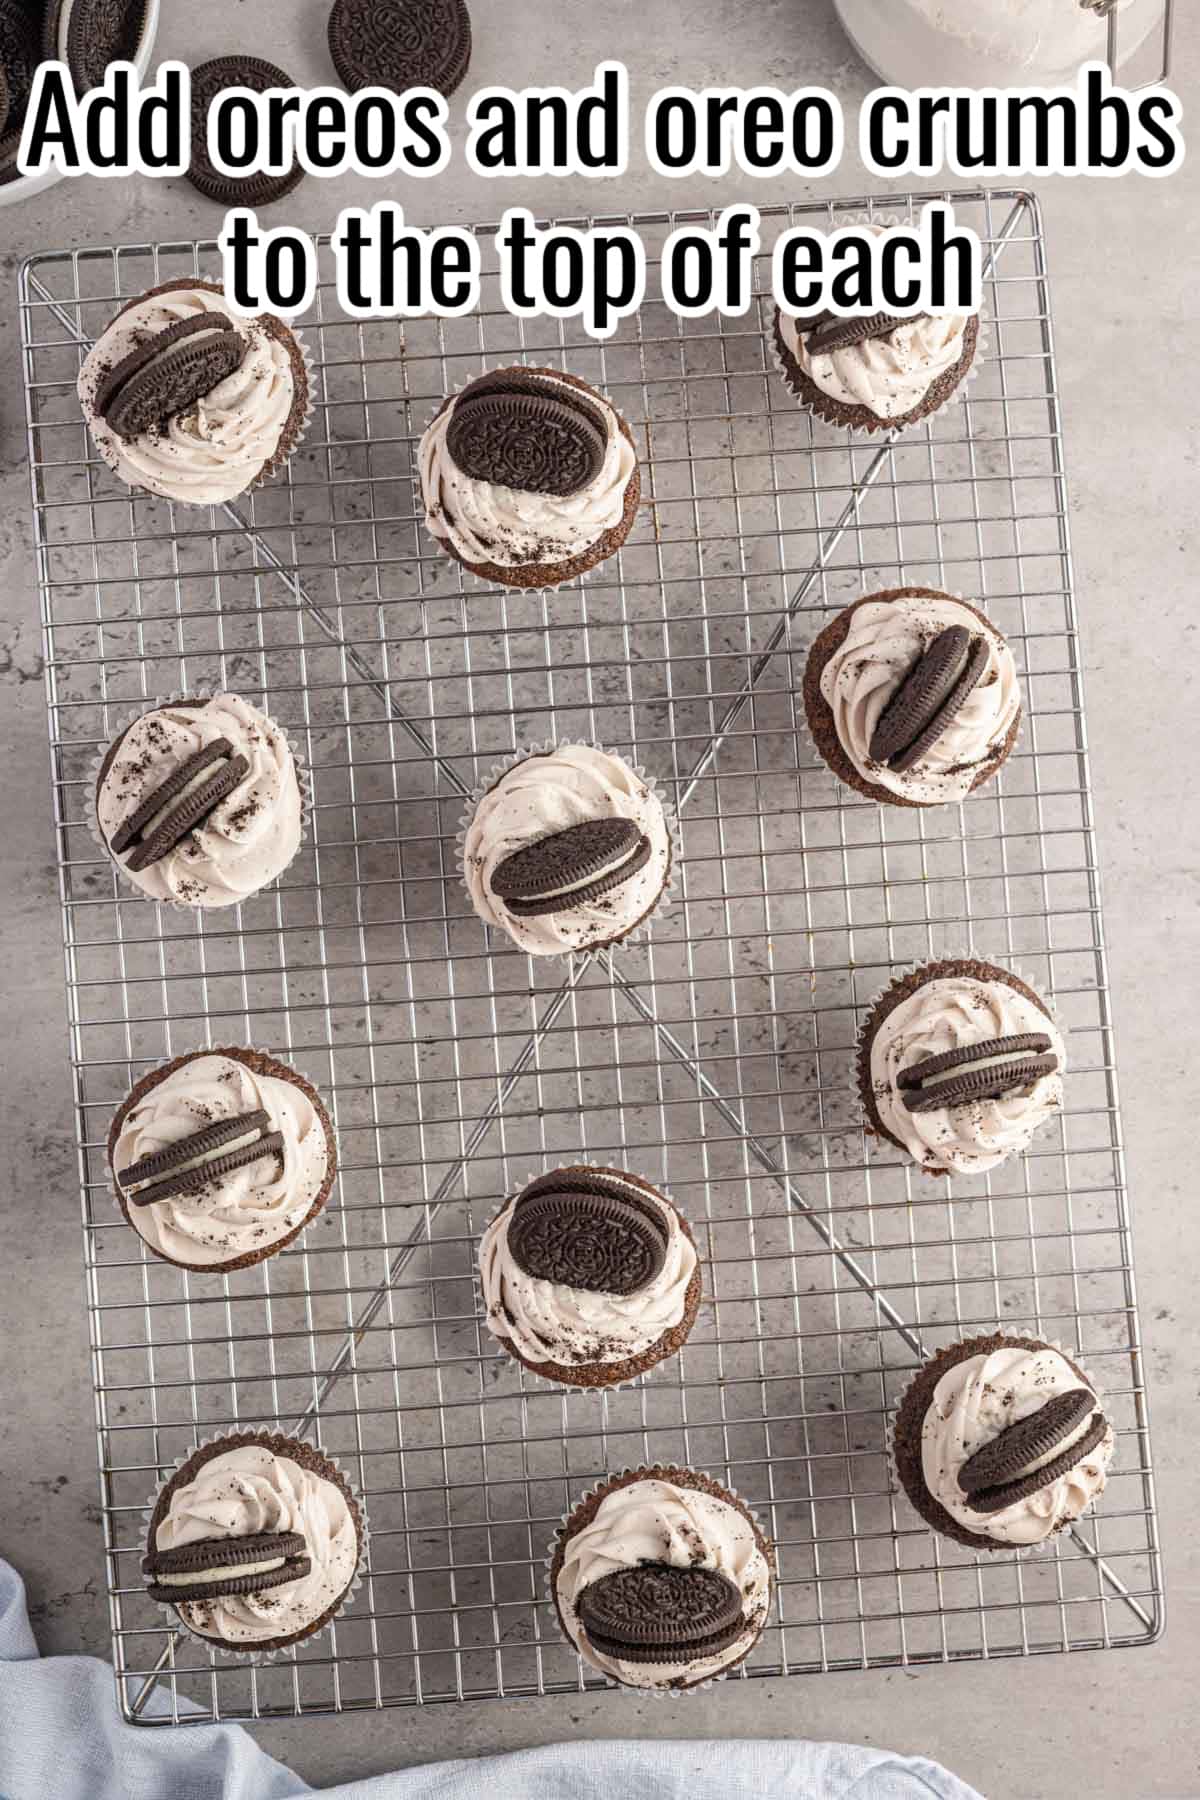 oreo cupcakes on a wire rack with words "add oreos and oreo crumbs to the top of each" overlaid in text.